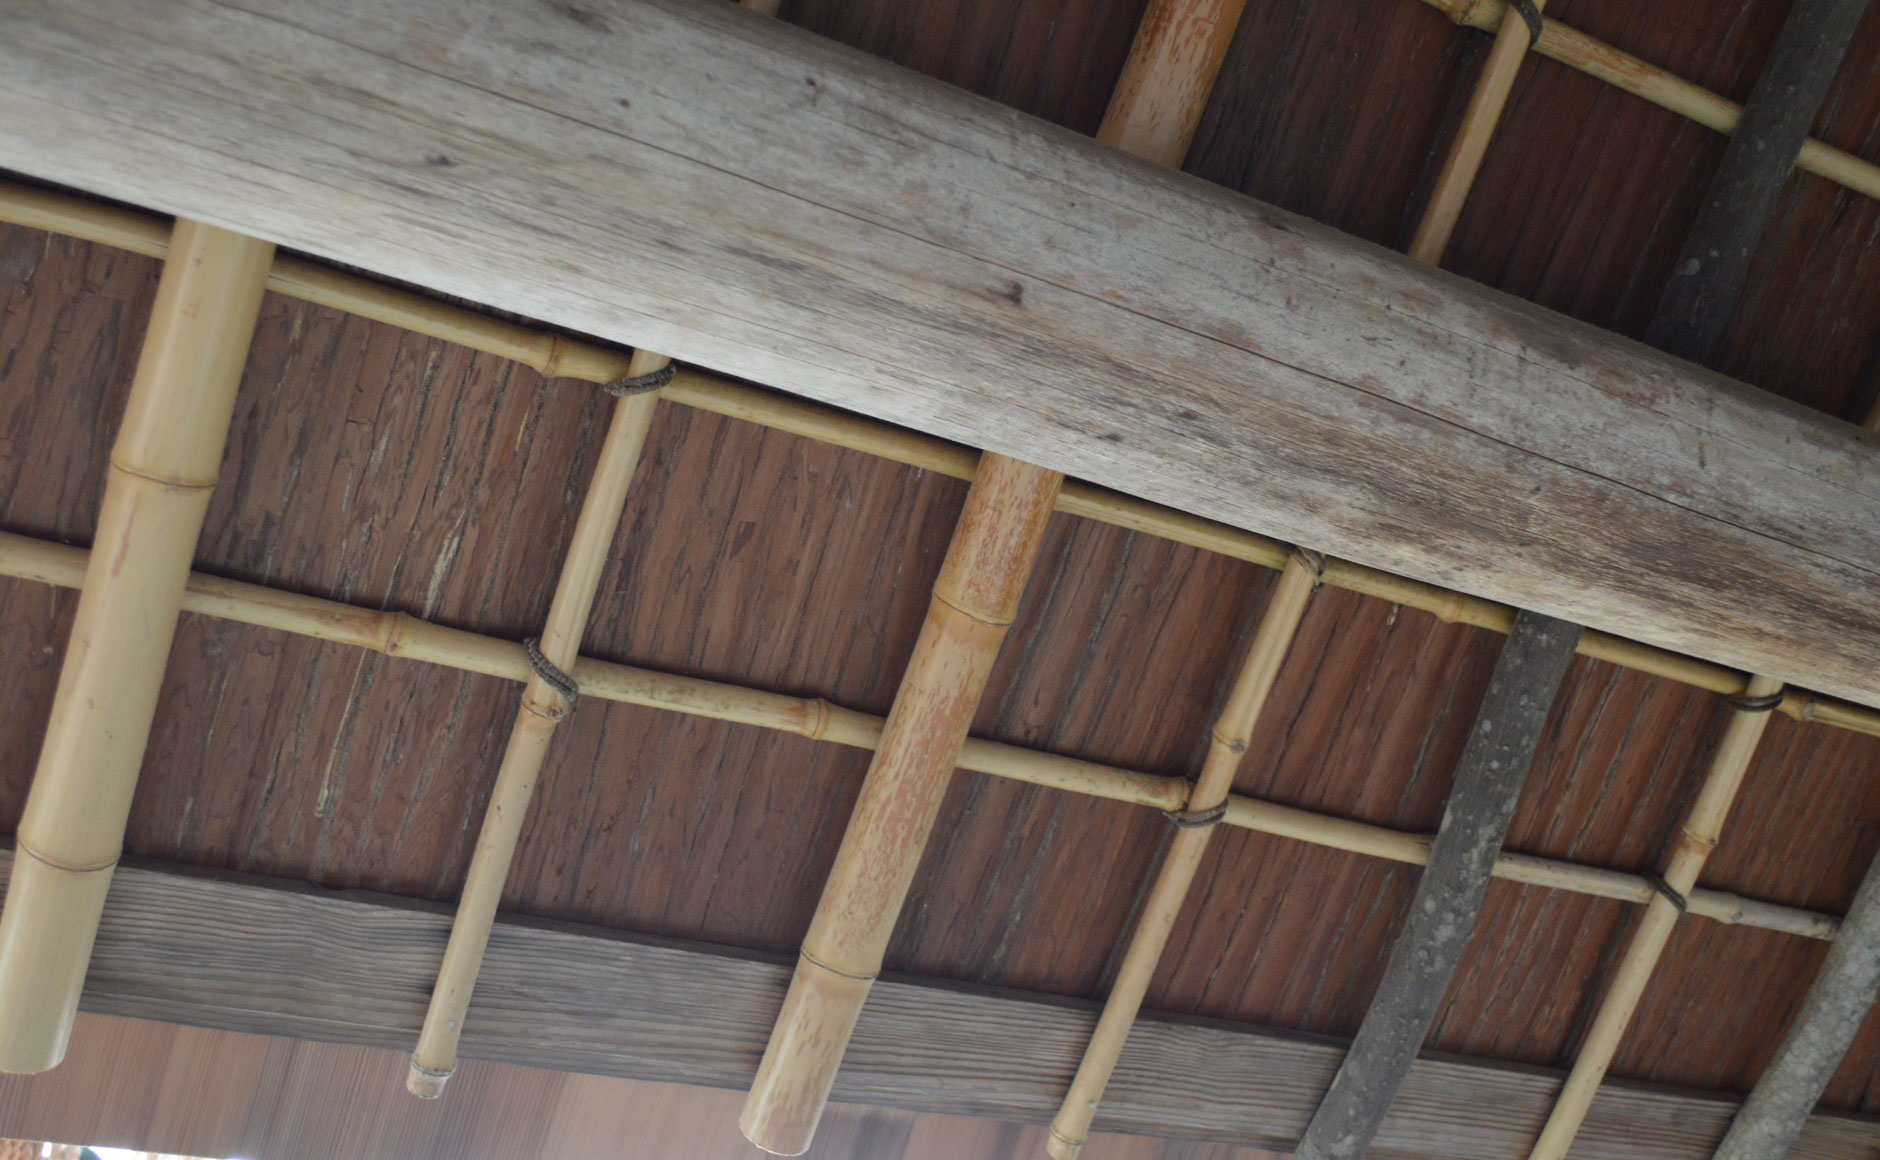 Many tree varieties used for the eave rafters